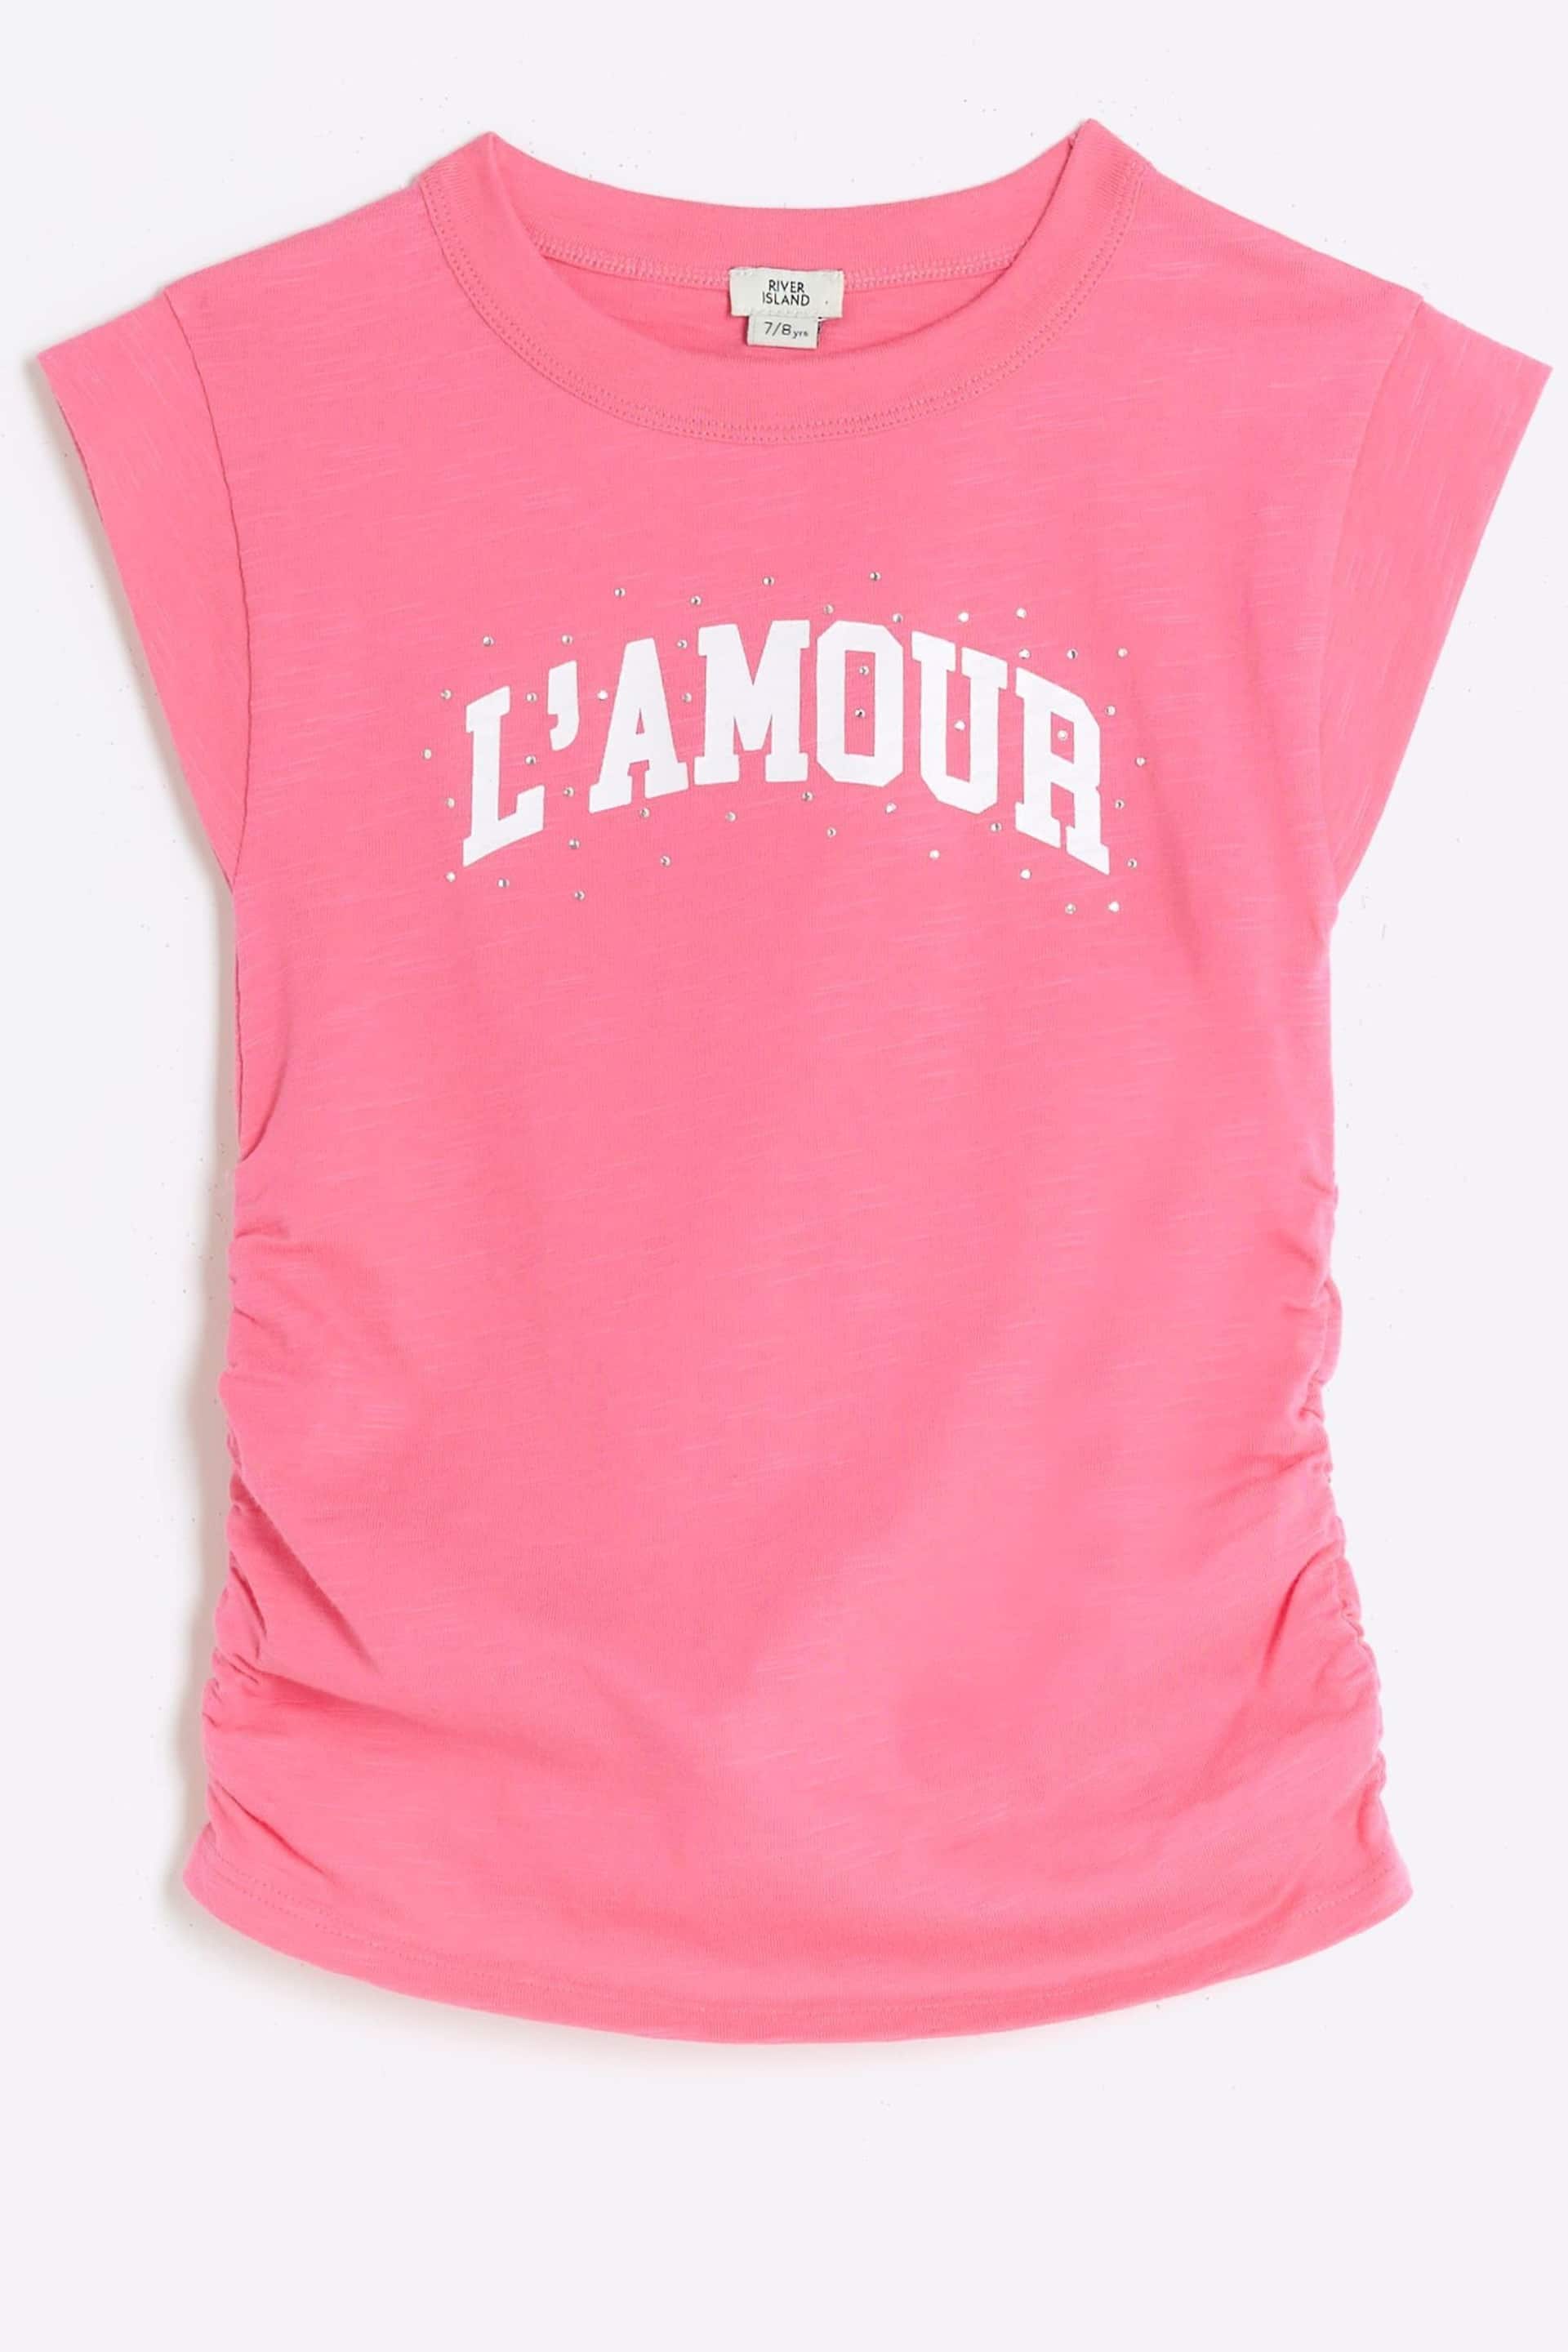 River Island Pink Girls Cap Sleeve Ruched Side T-Shirt - Image 1 of 3